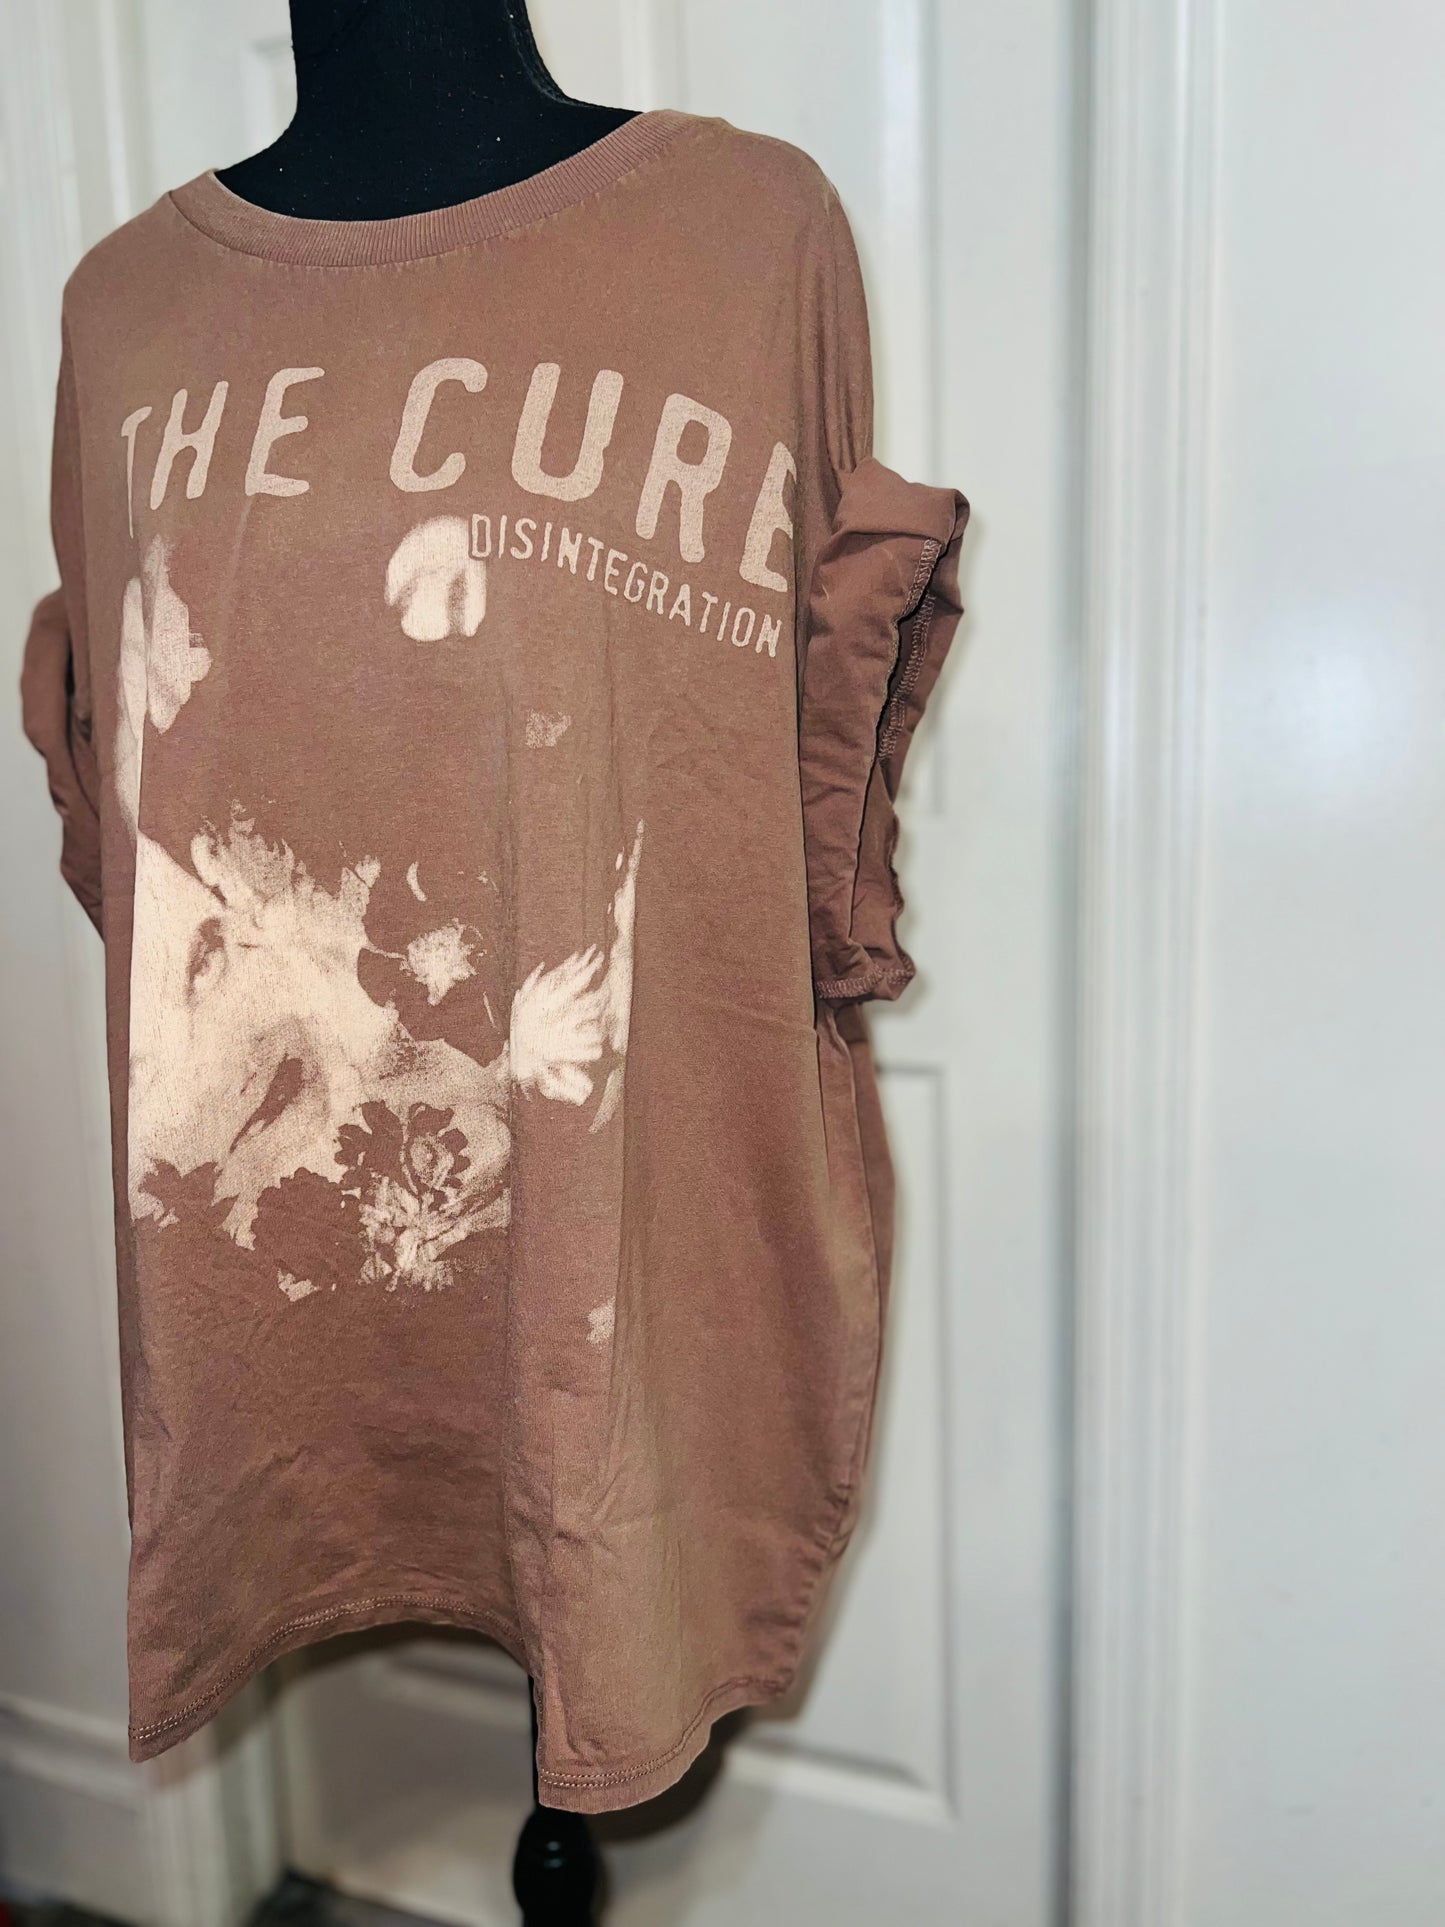 The Cure Oversized Distressed Tee